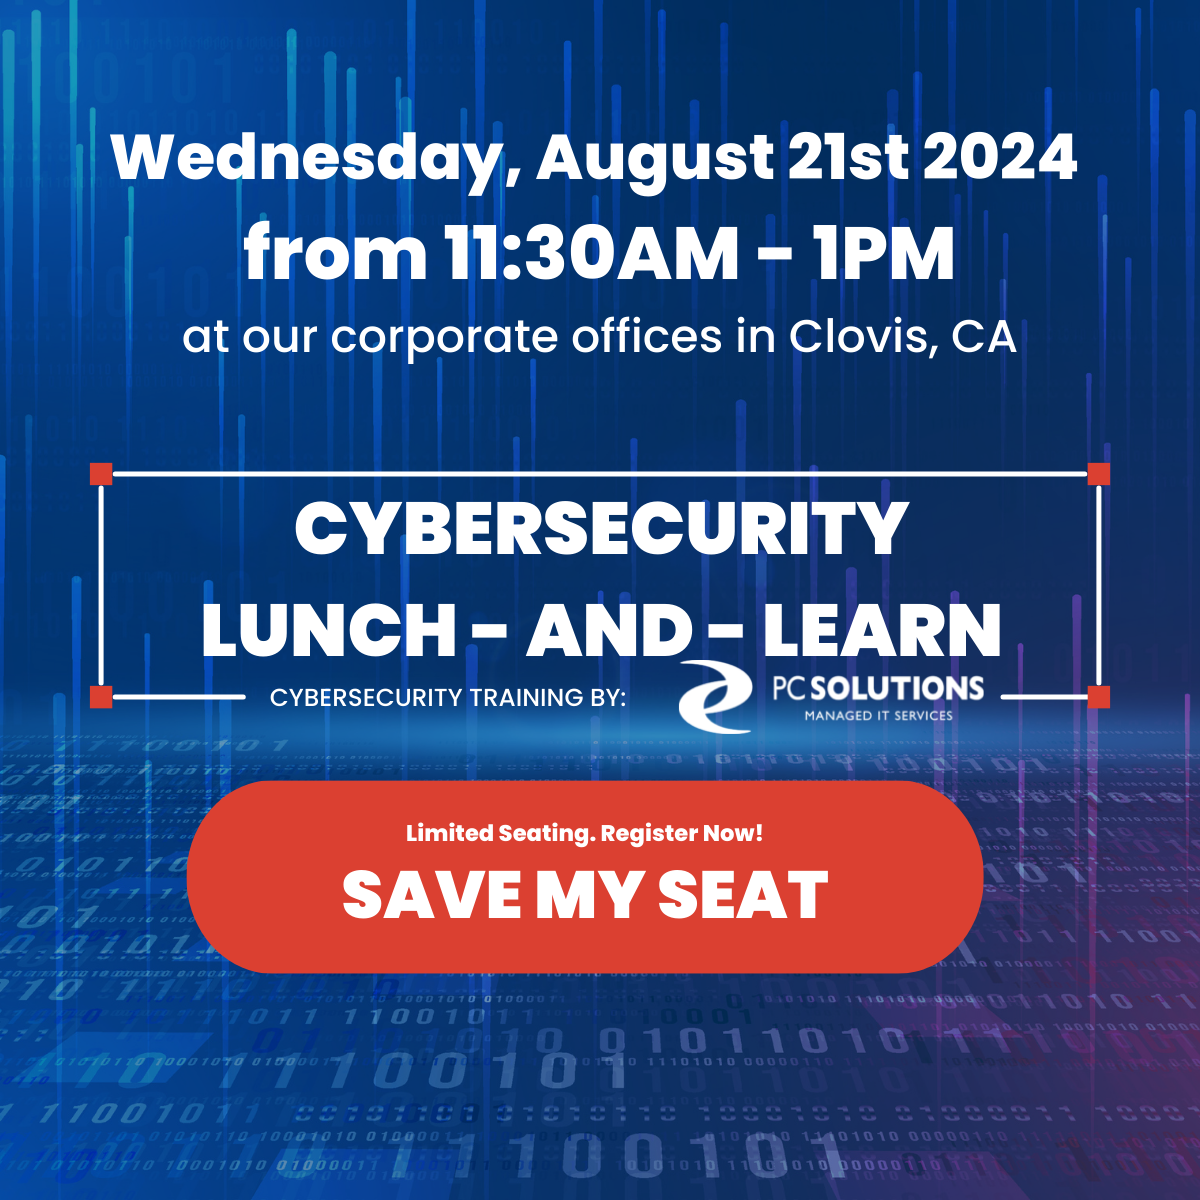 cybersecurity, lunch and learn invite